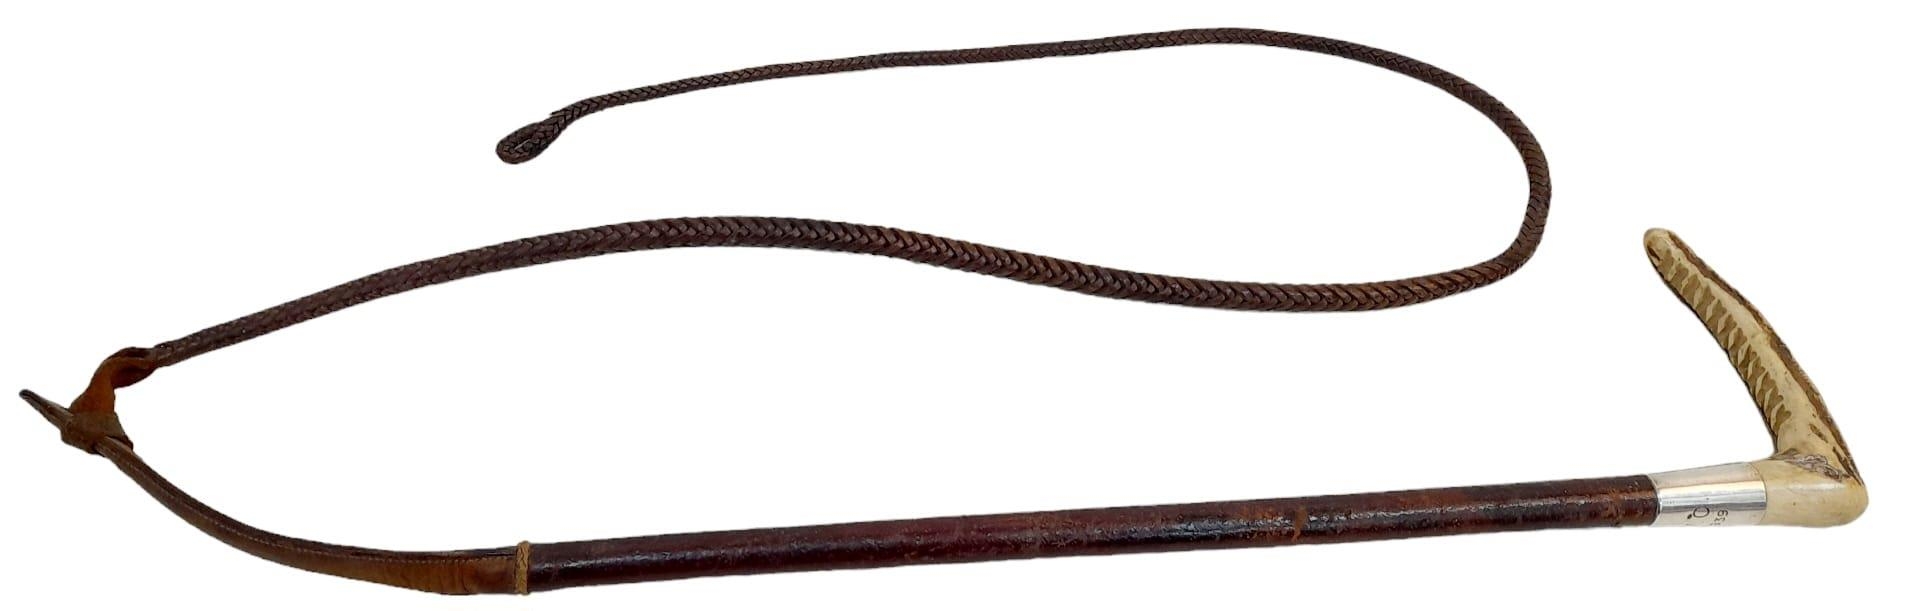 A Vintage Bone Handled Riding Whip. Hard bone gives way to entwined leather - All topped off with - Image 2 of 5